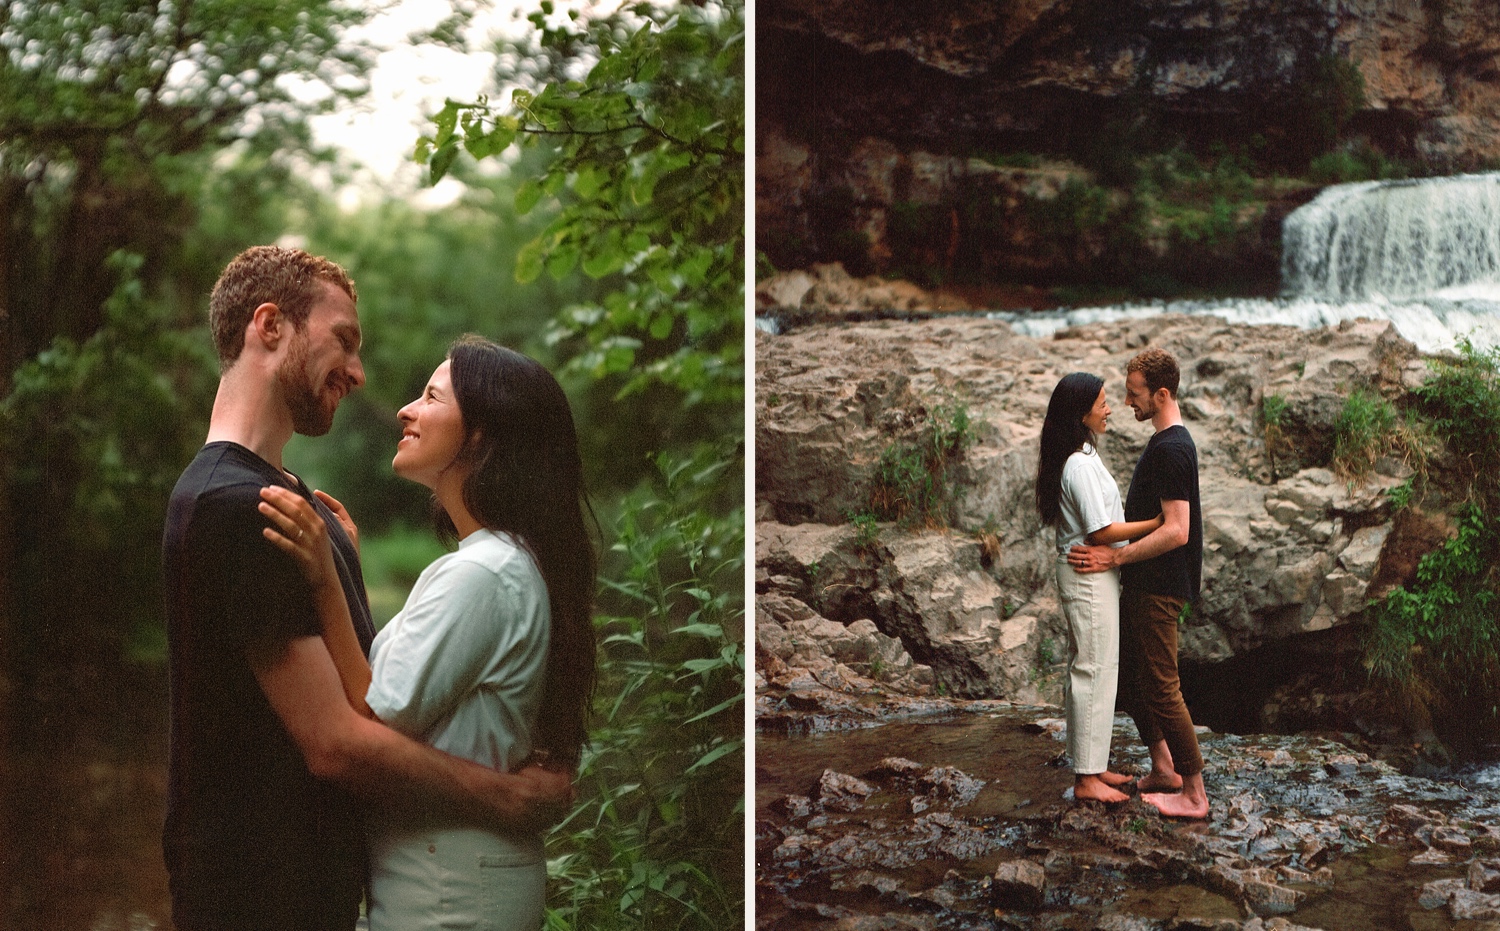 Mamiya Rb67 photos on portra 400. Couples photos on film at Willow River state park.